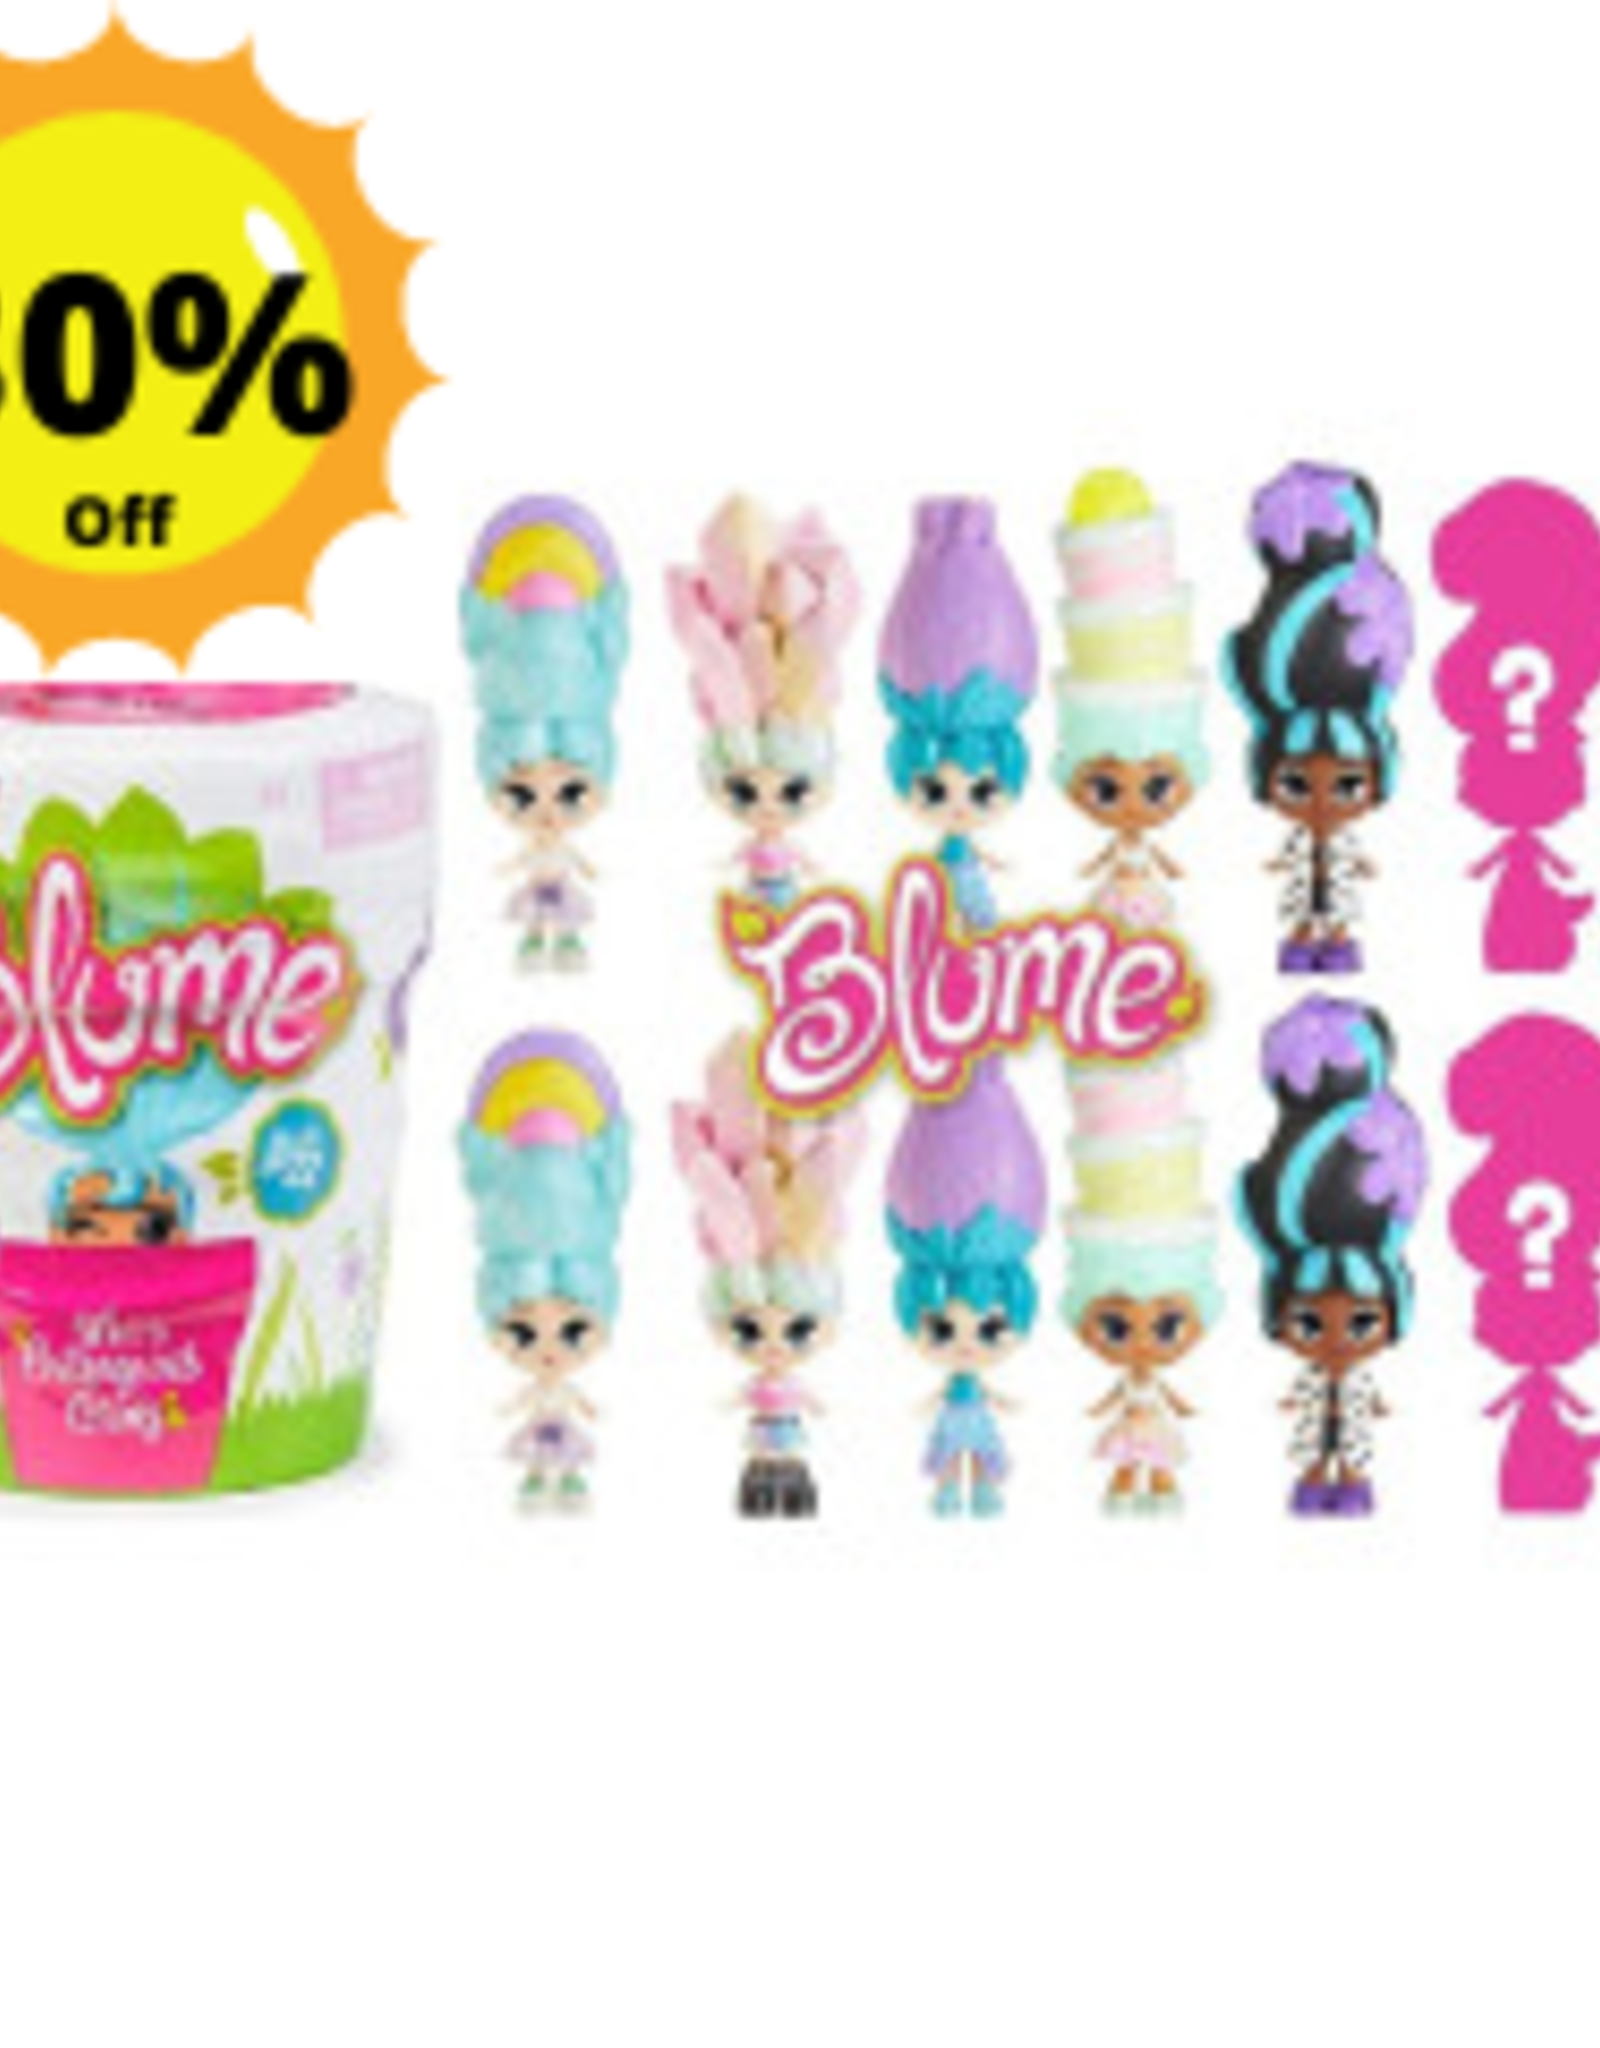 where to buy blume dolls